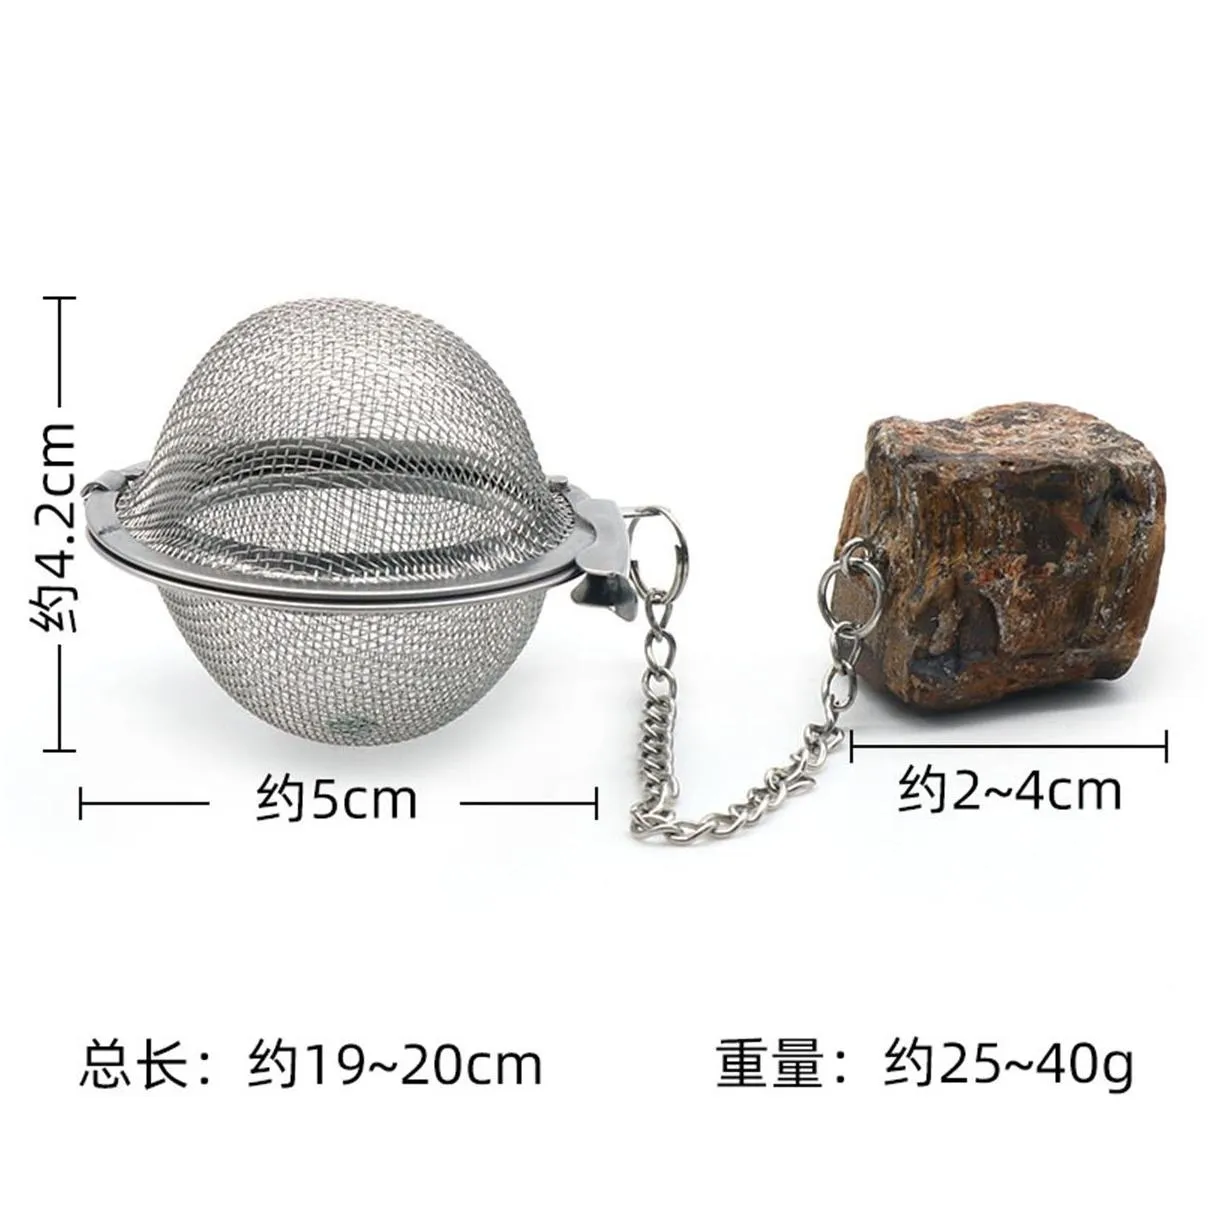 Infusers for Loose Tea Mesh Strainer with Extended Chain Key Rings Hook Stainless Steel Charm Energy Drip Trays Crystal Shaker Ball